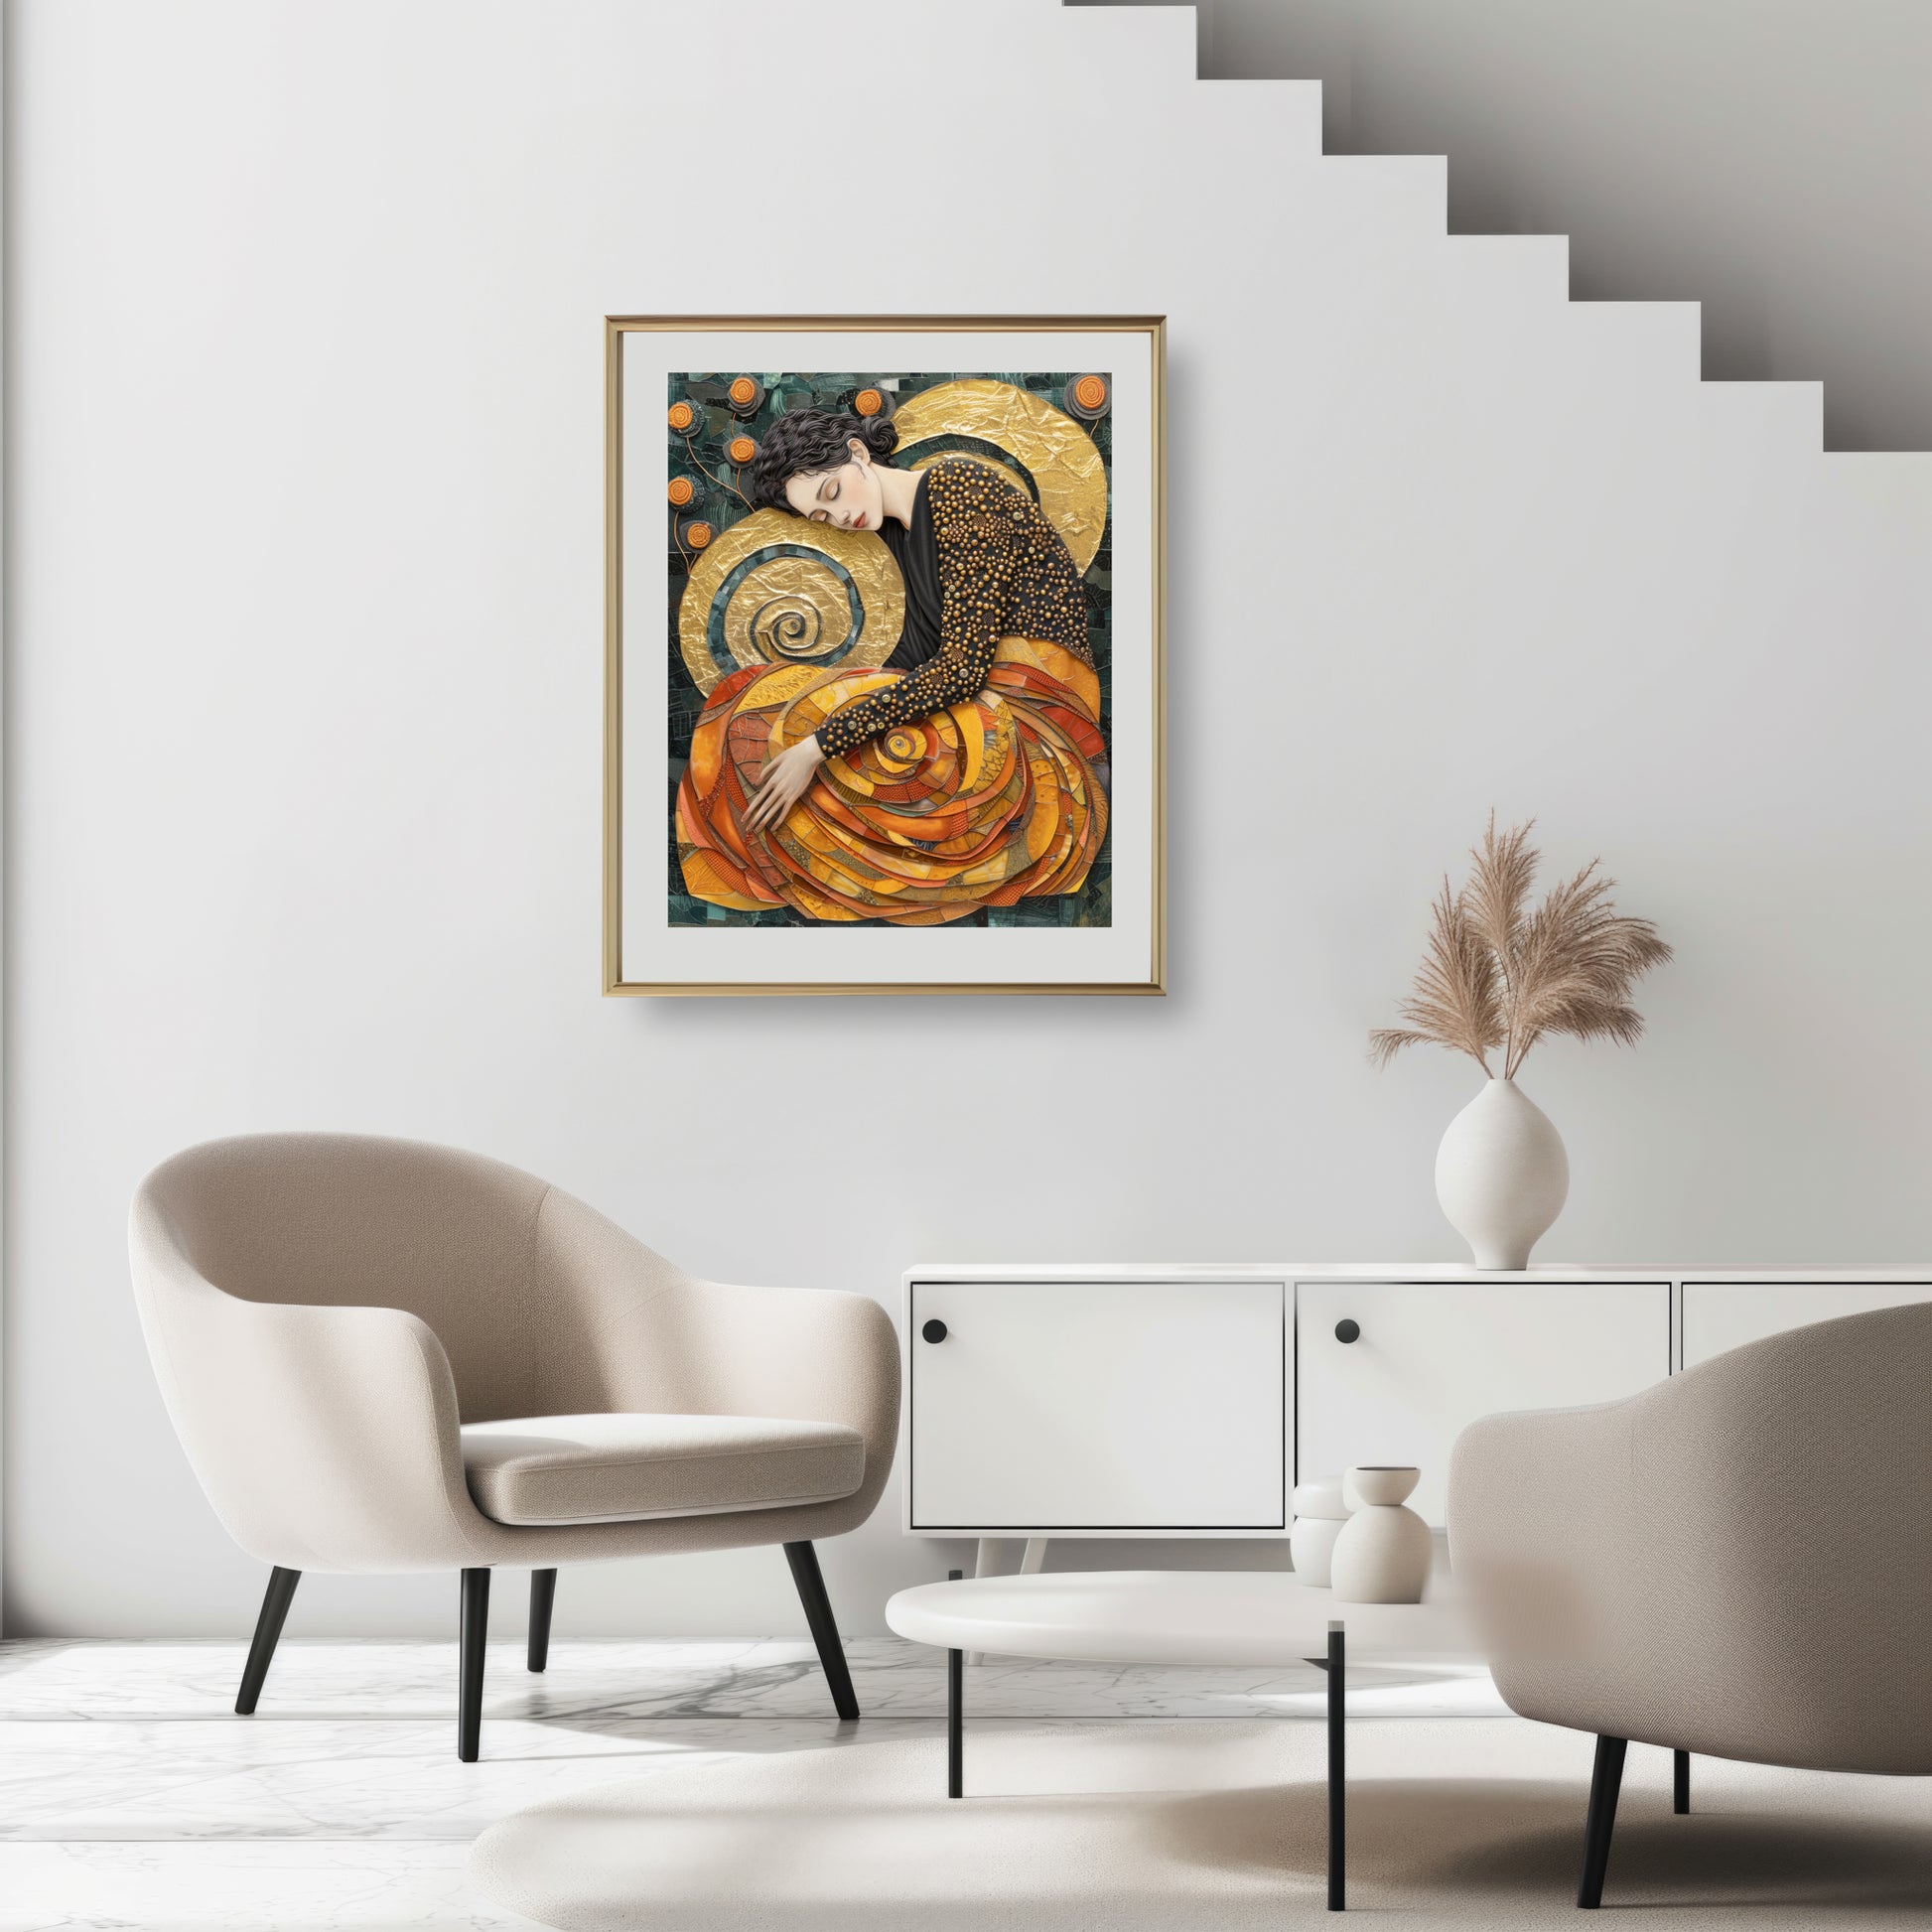 Art print of a woman resting on golden spirals, part of the Heart Of Gold collection, ideal for any fine art prints collection.